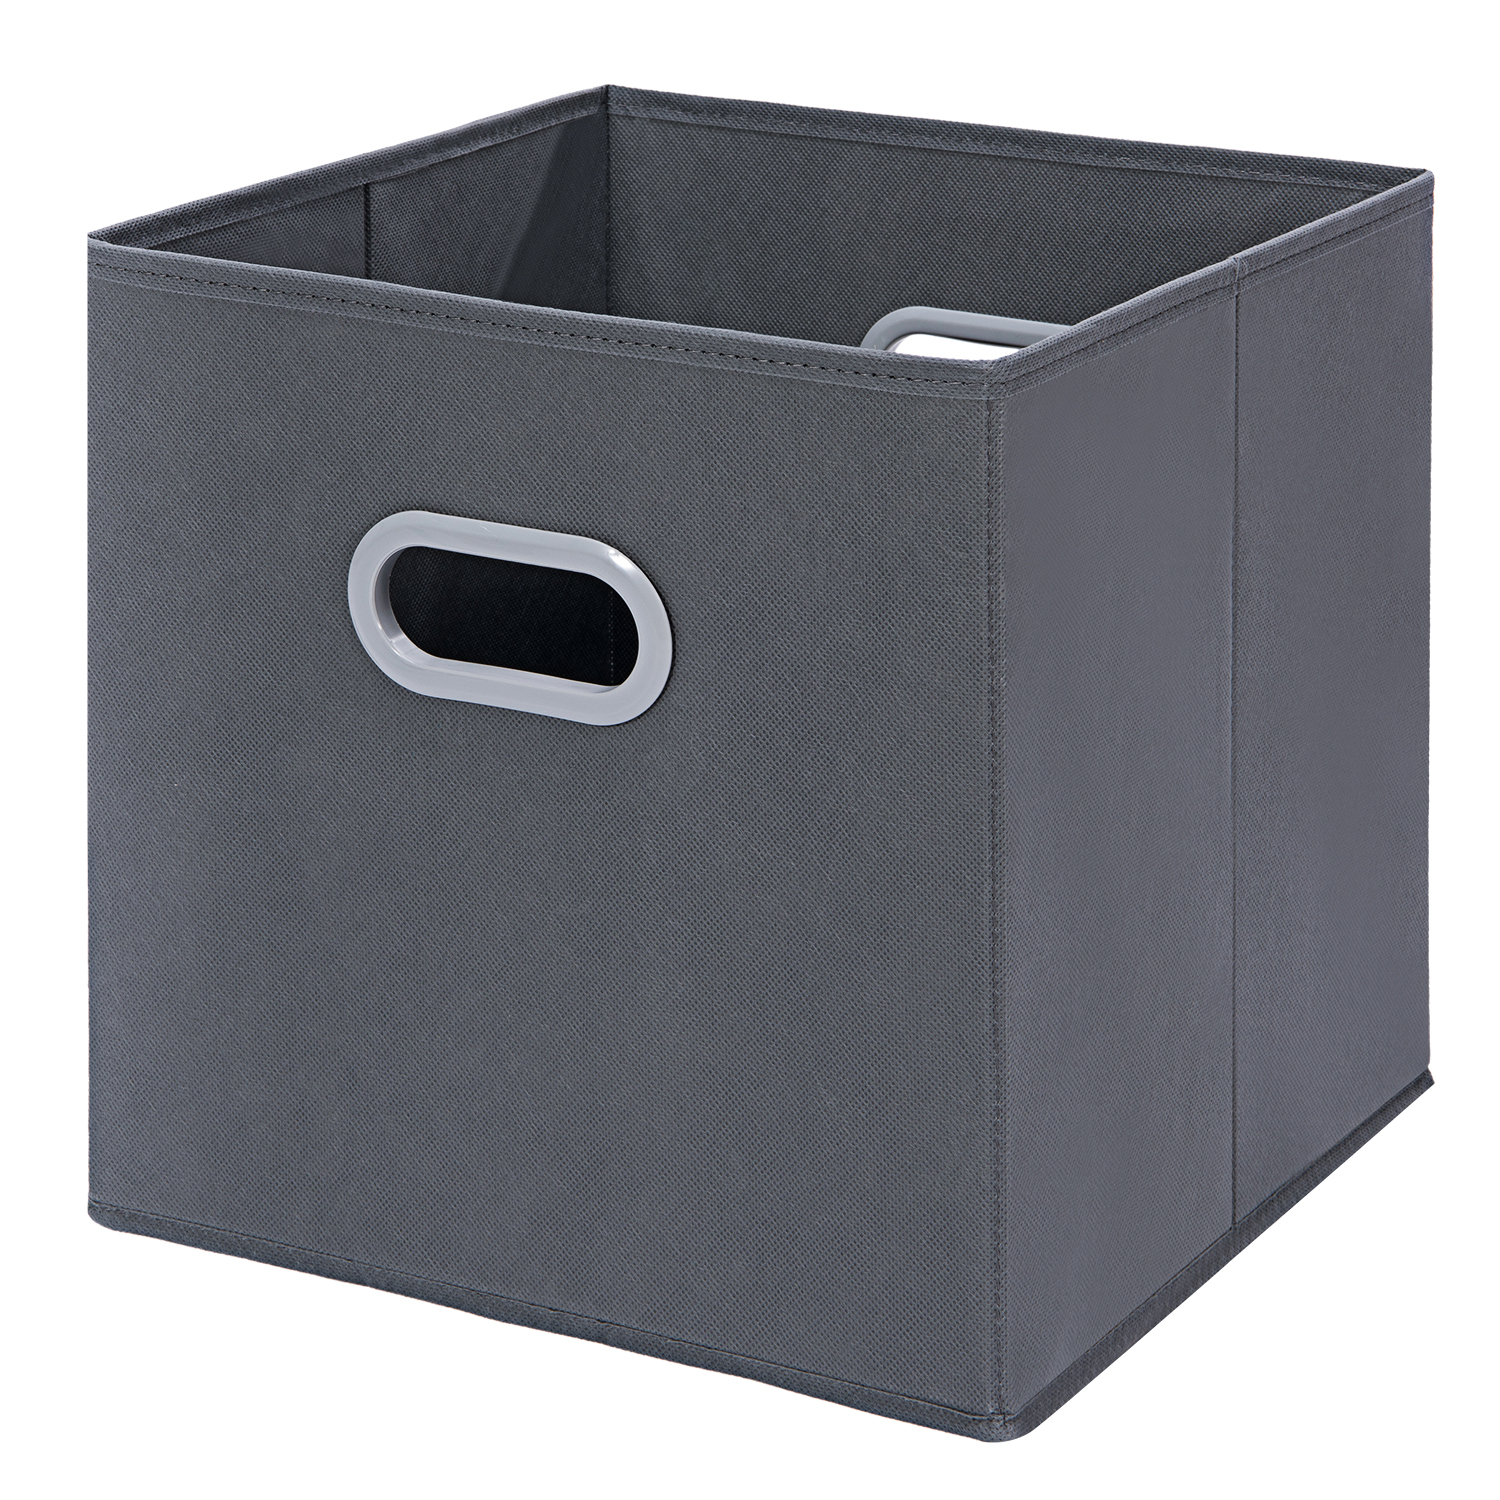 Cloth Storage Bins Maidmax Set Of 6 Nonwoven Foldable Collapsible intended for size 1500 X 1500